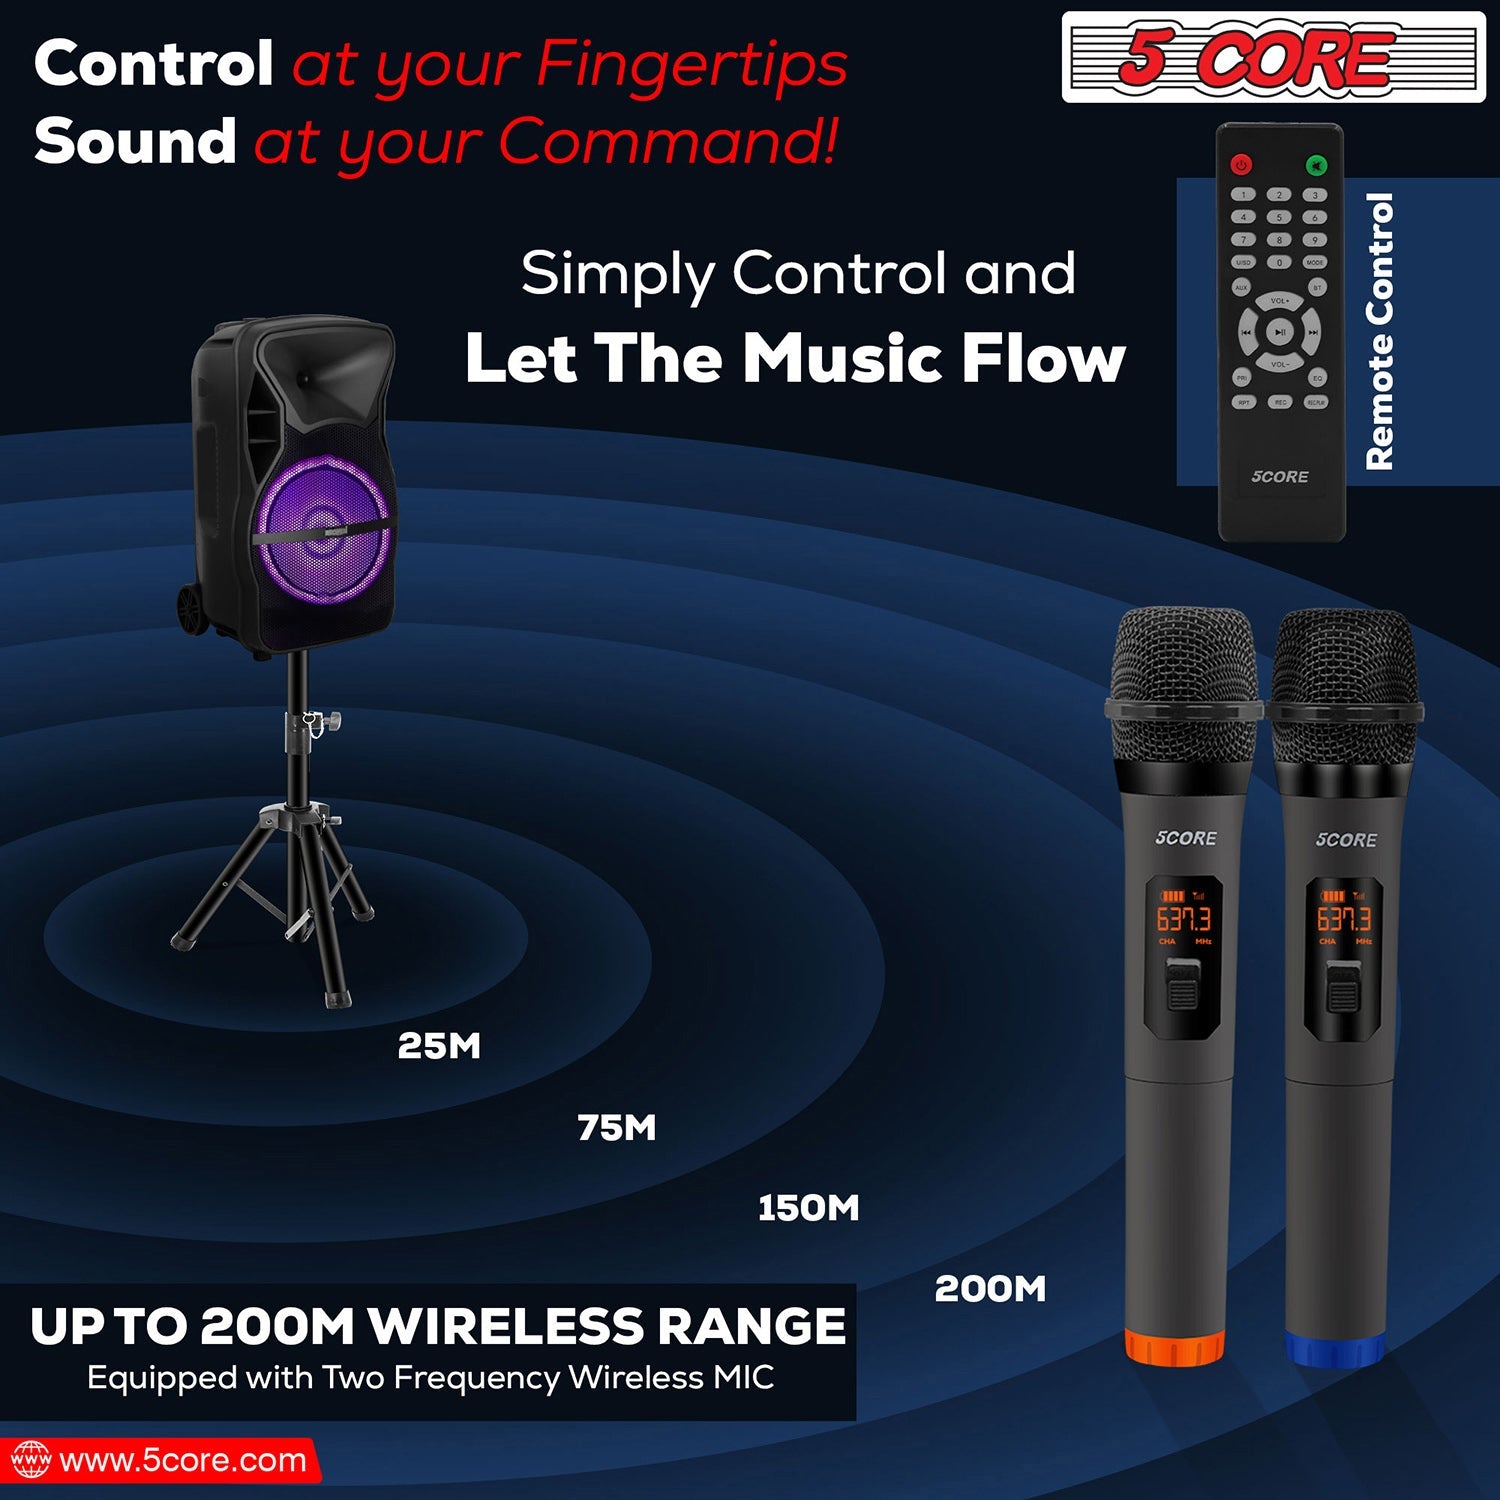 5Core Portable PA System: Big-powered Bluetooth party speaker with 2 wireless mics for karaoke and DJ events.